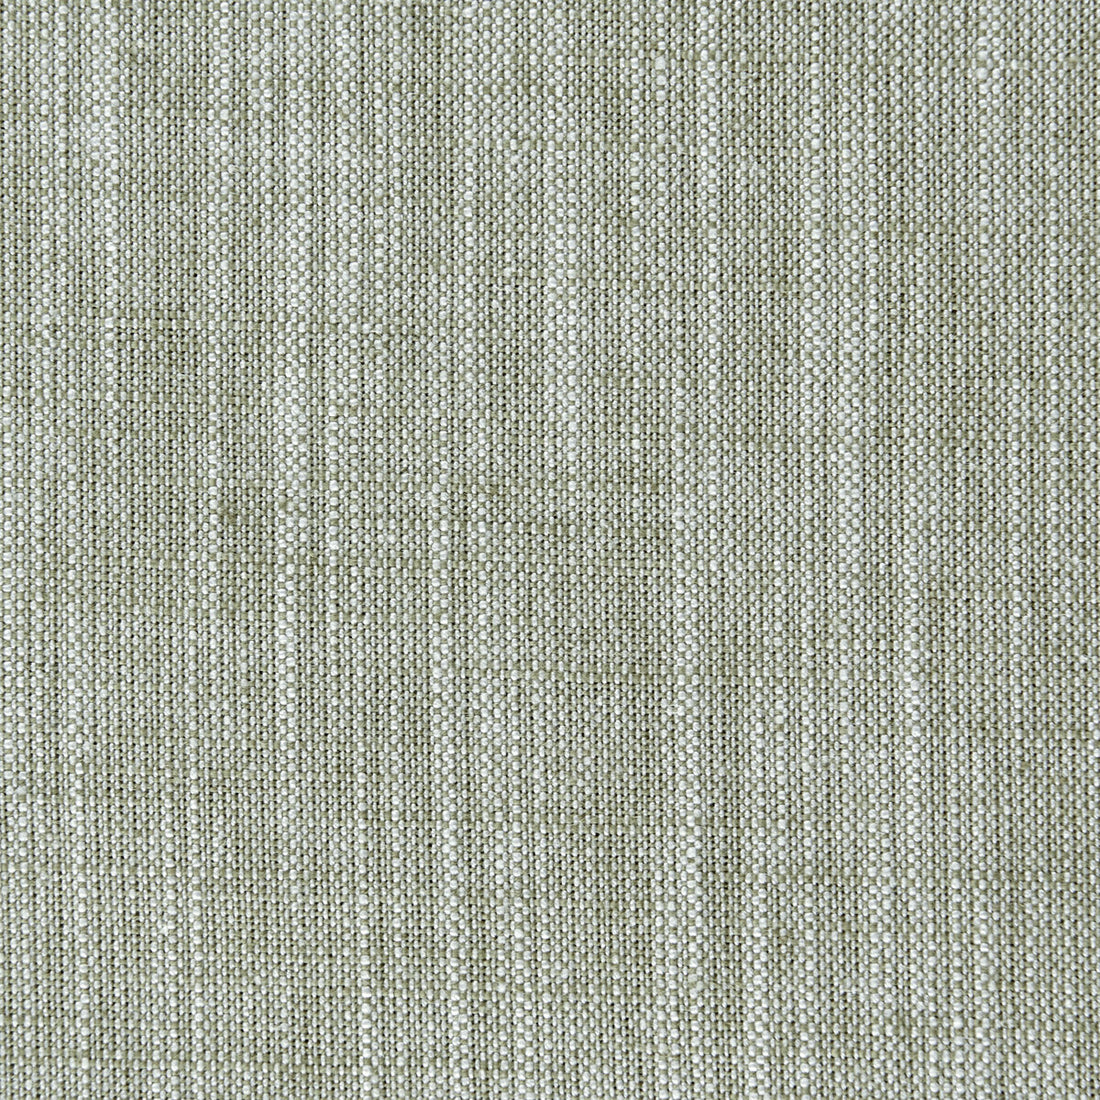 Biarritz fabric in eau de nil color - pattern F0965/15.CAC.0 - by Clarke And Clarke in the Clarke &amp; Clarke Biarritz collection